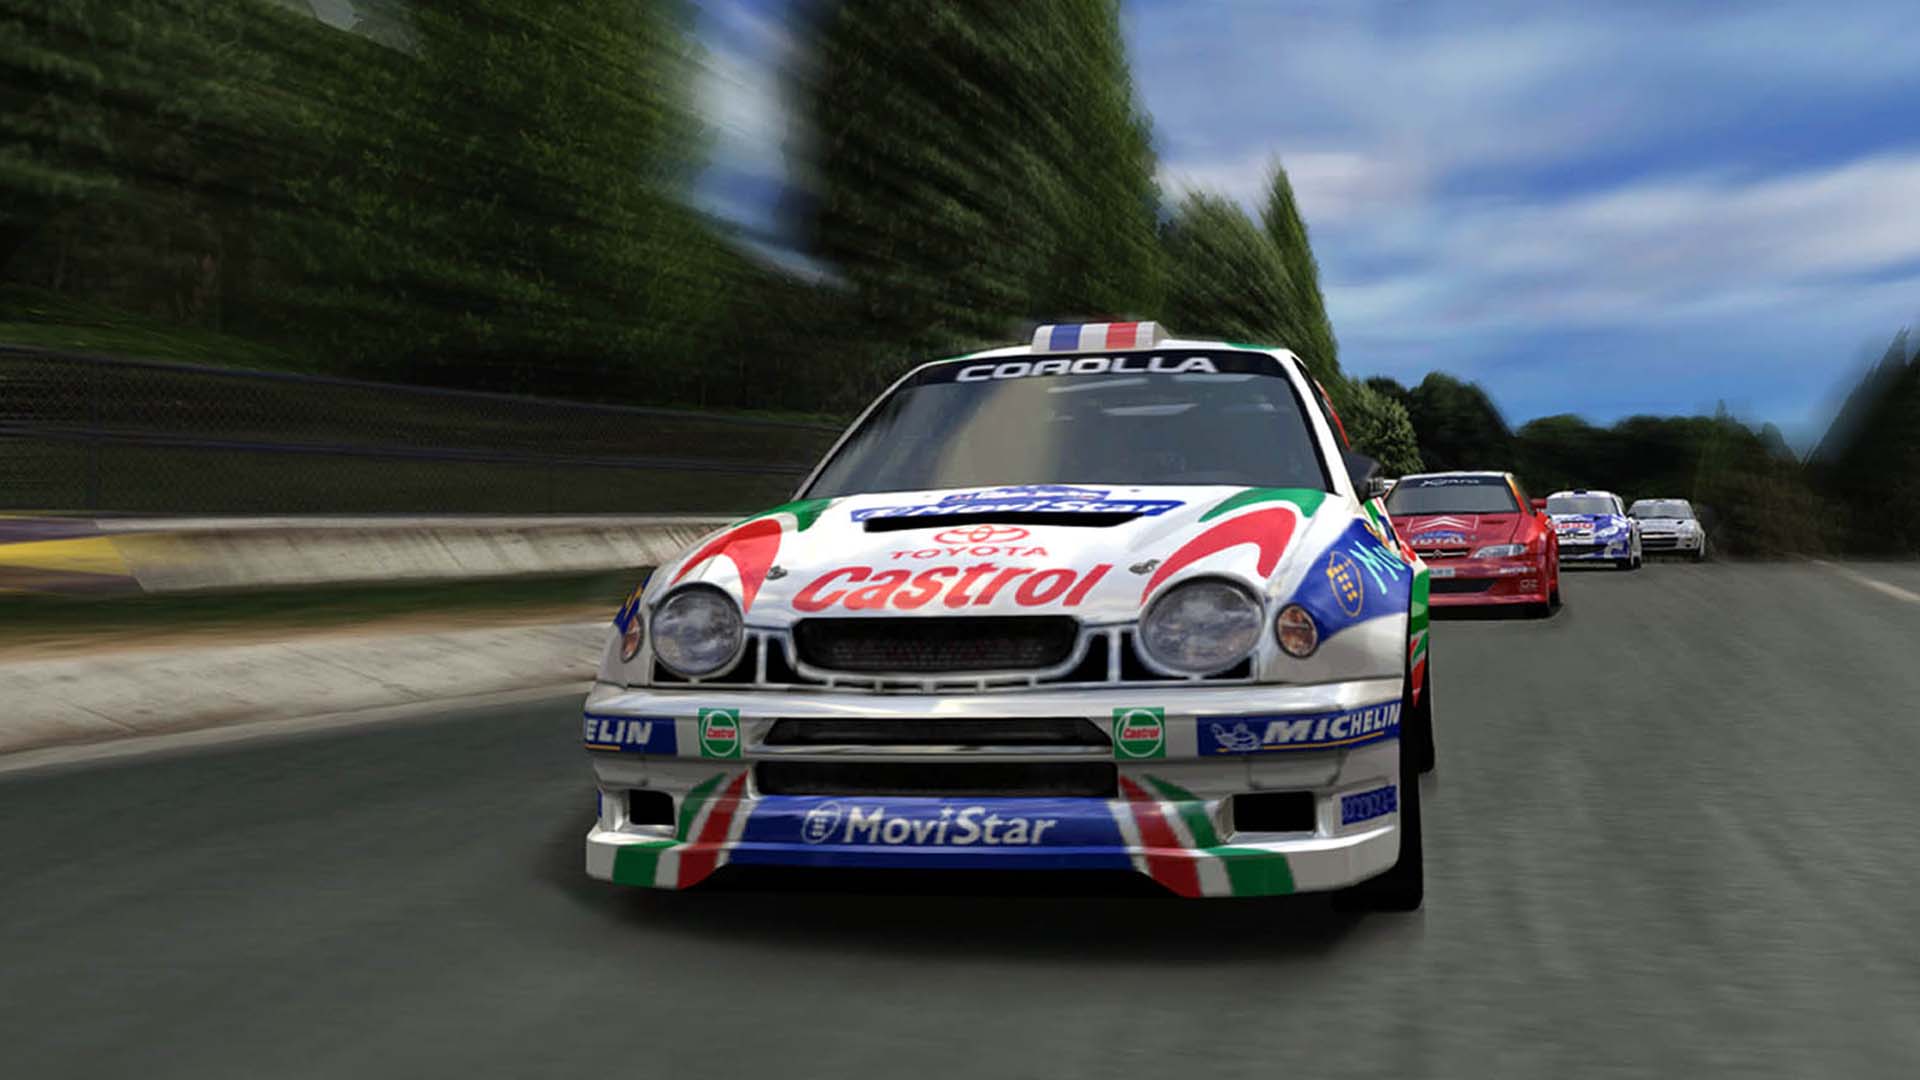 Gran Turismo 4 Cheat Codes Discovered 20 Years Later